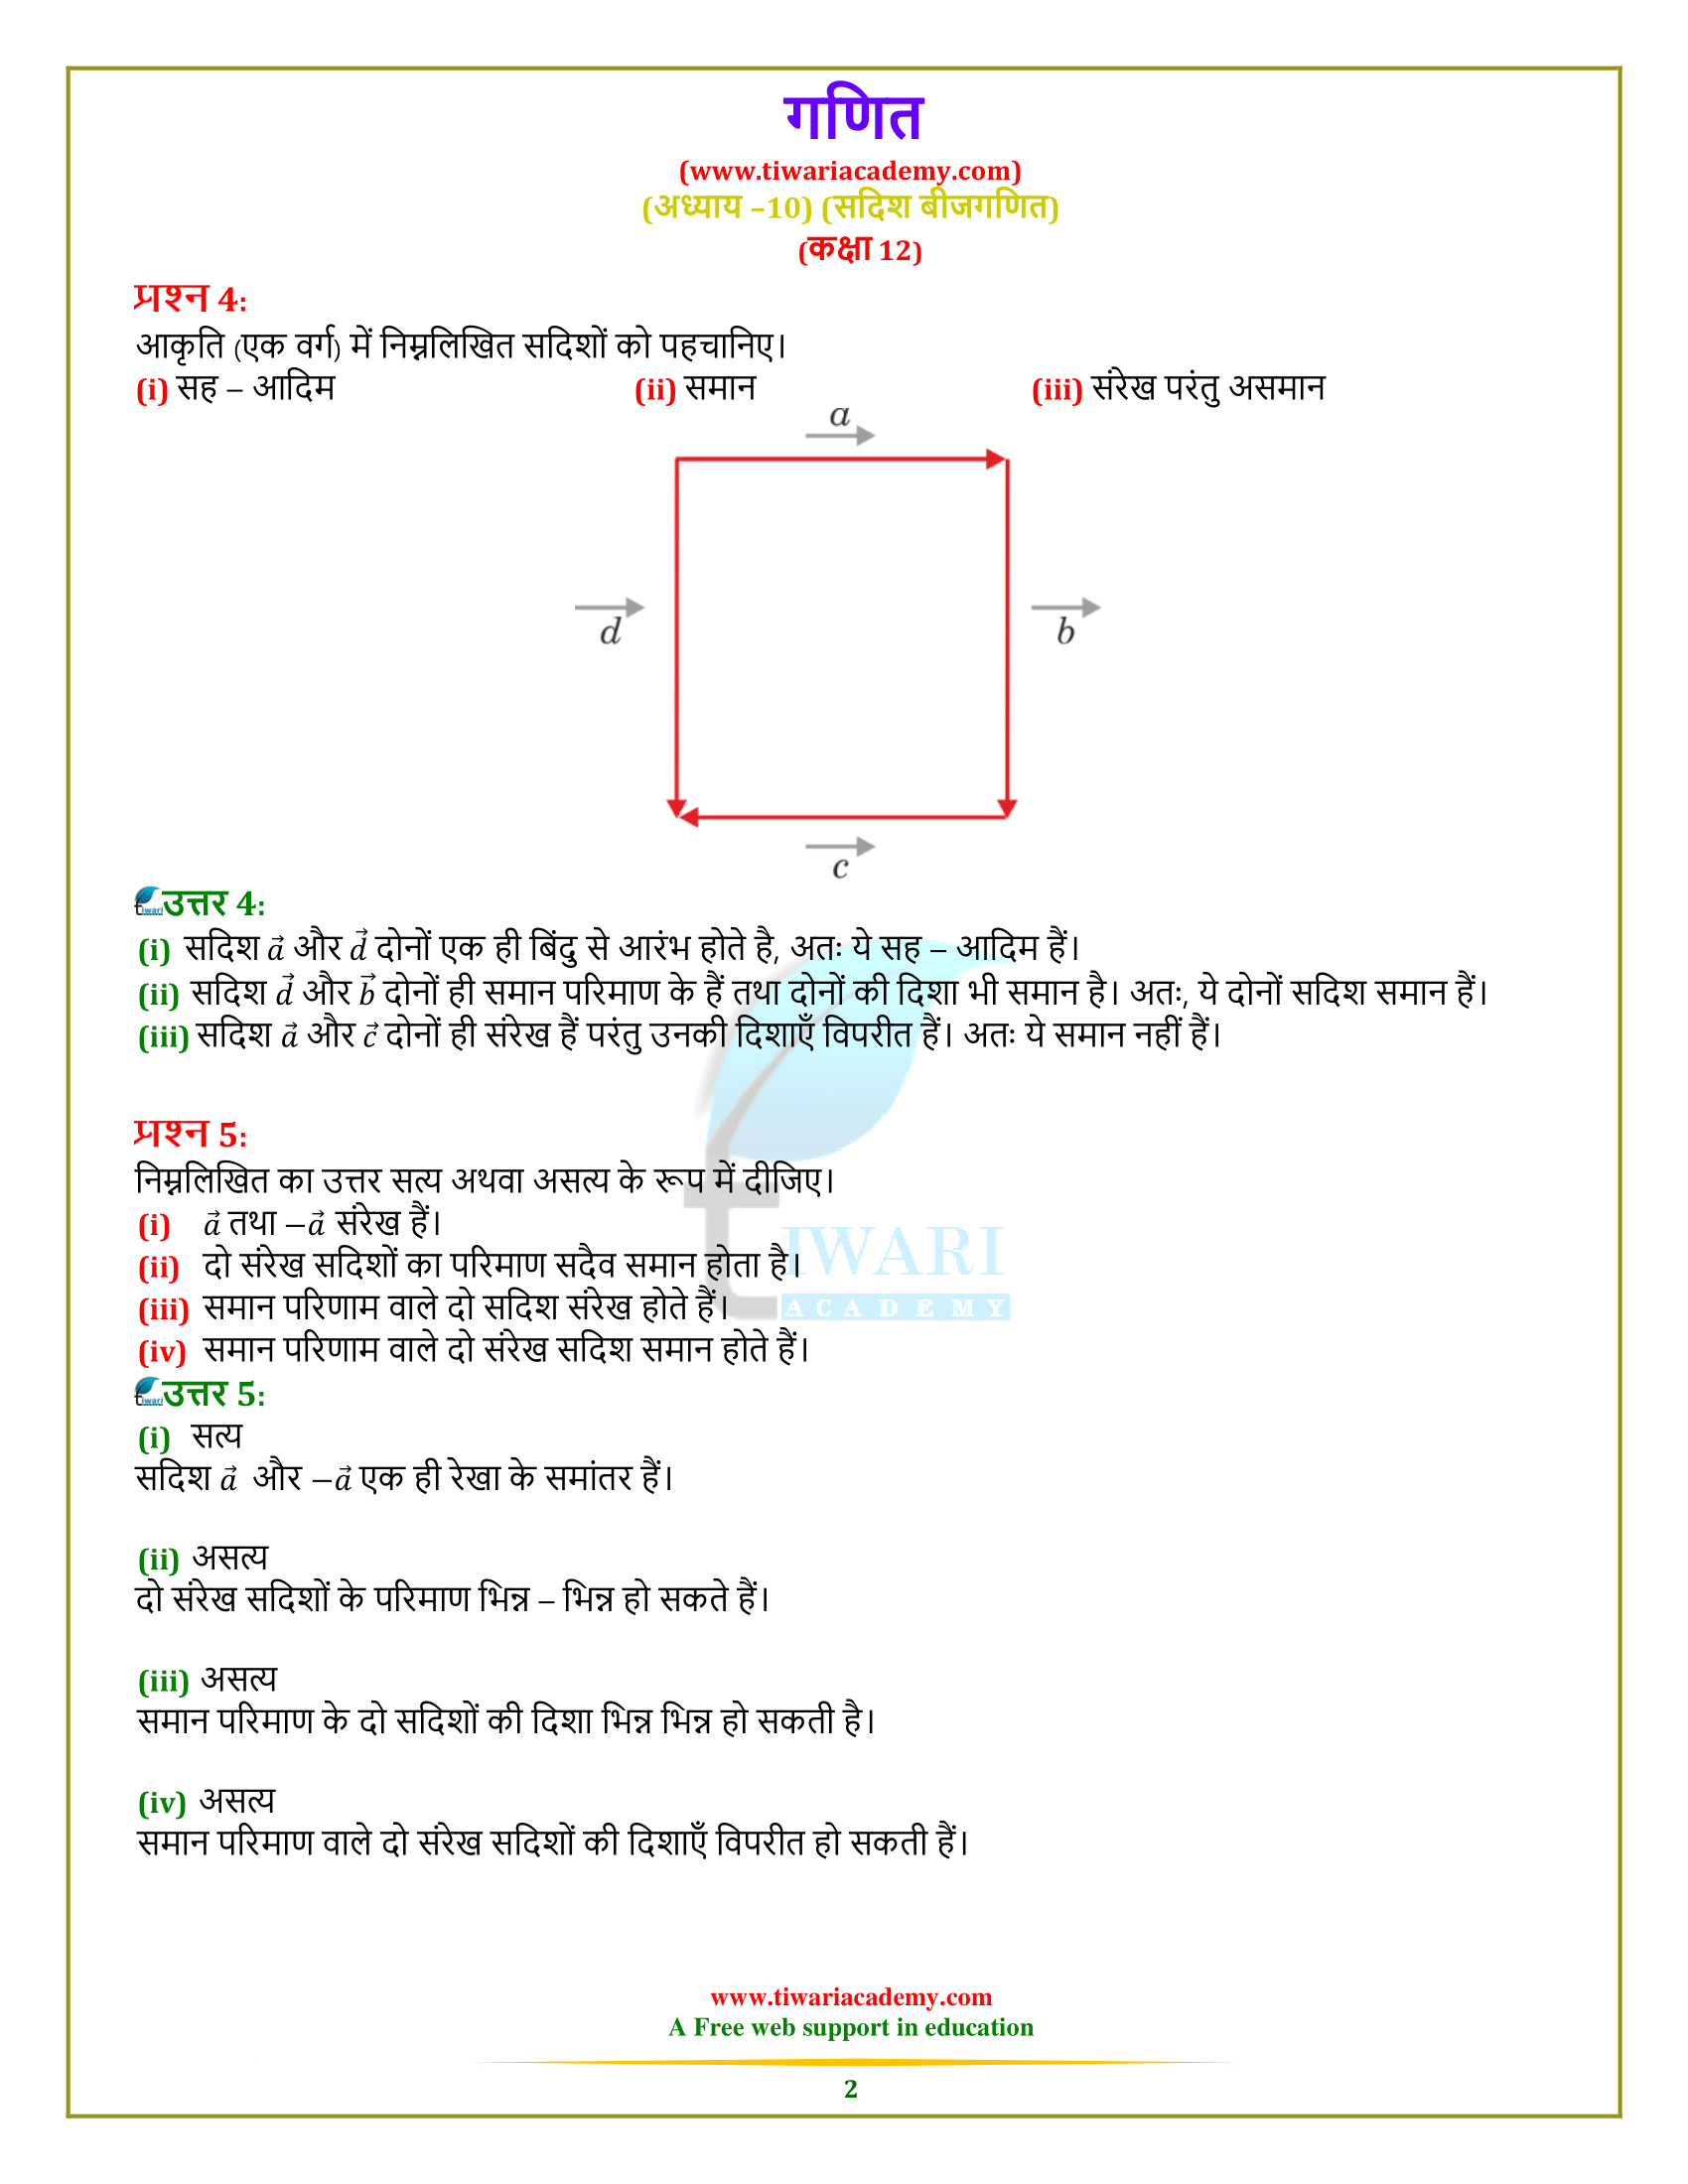 Class 12 Maths Exercise 10.1 Solution in Hindi Medium up board